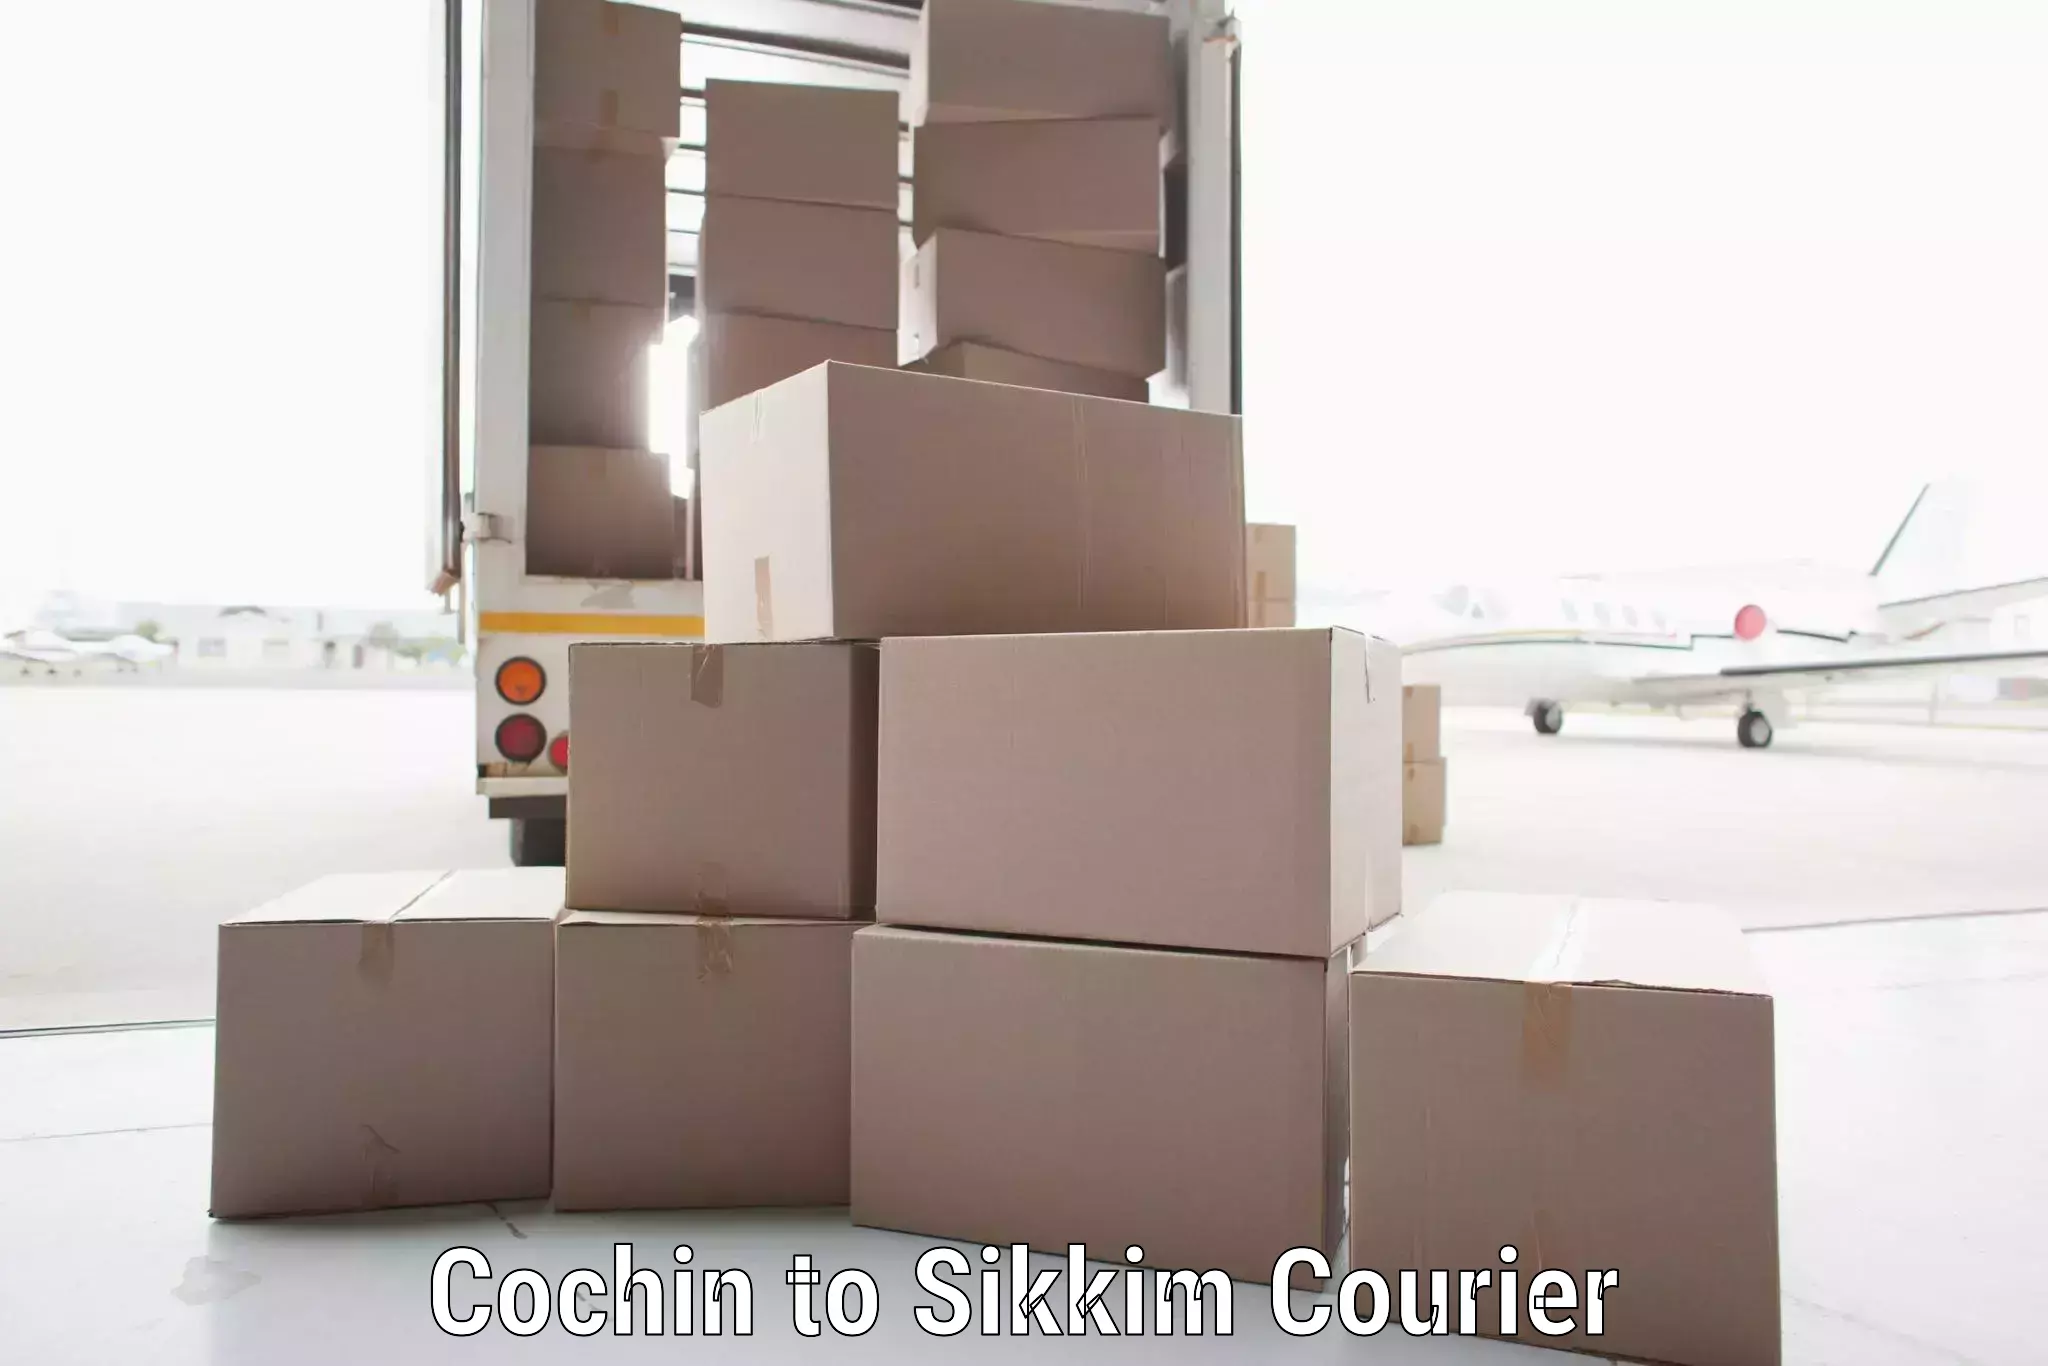 State-of-the-art courier technology Cochin to Sikkim